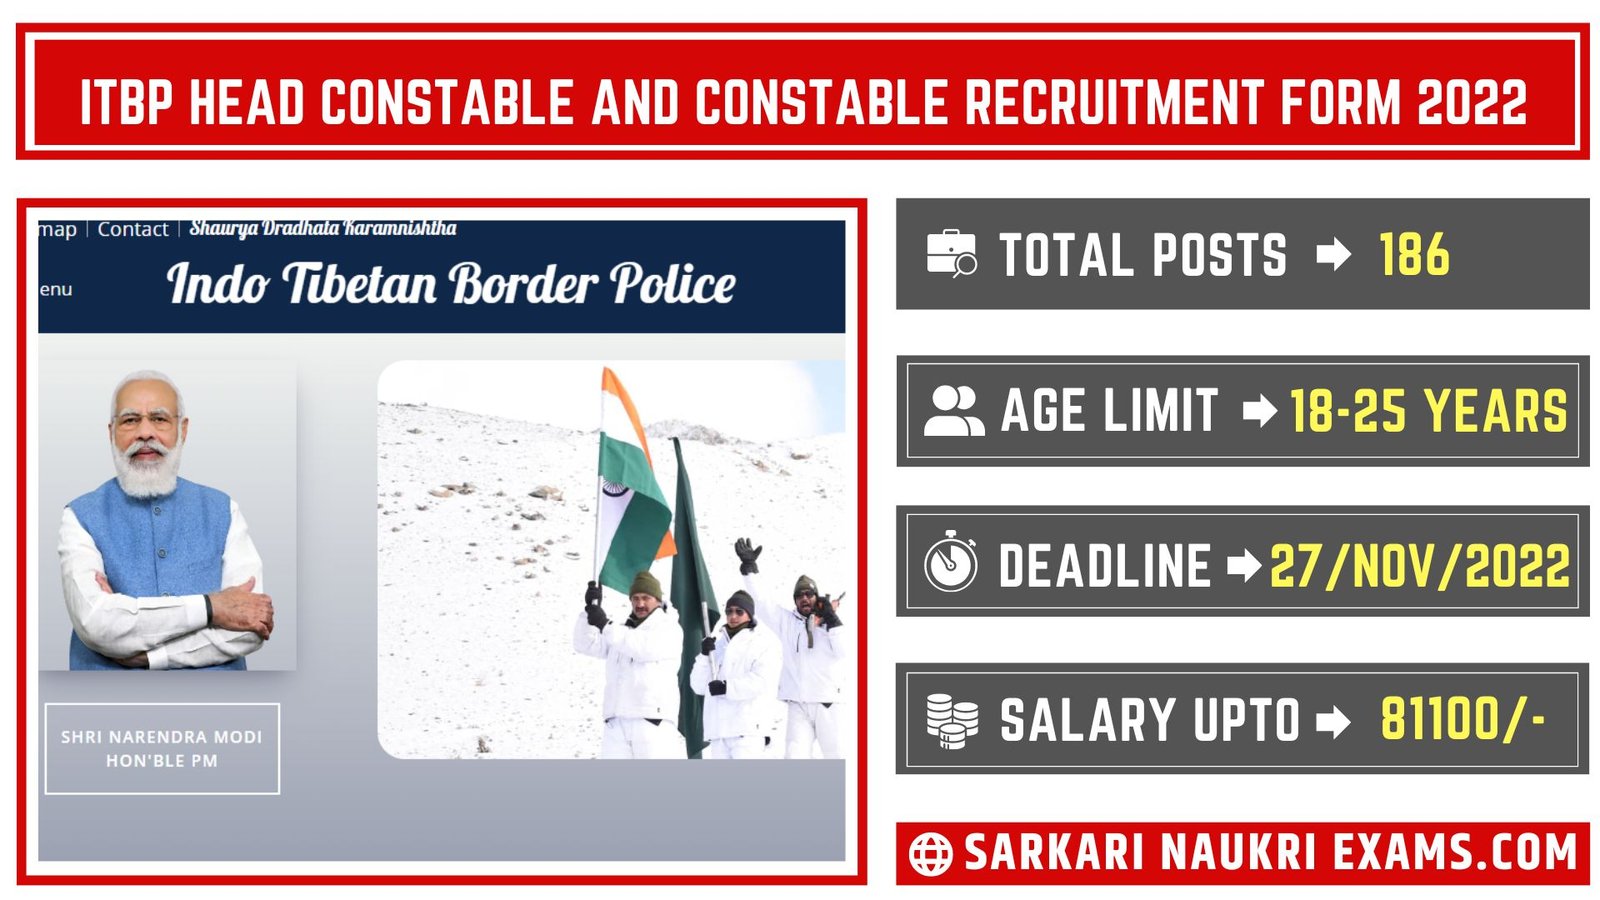 ITBP Head Constable and Constable Recruitment Form 2022 | Salary Up To 81100/-